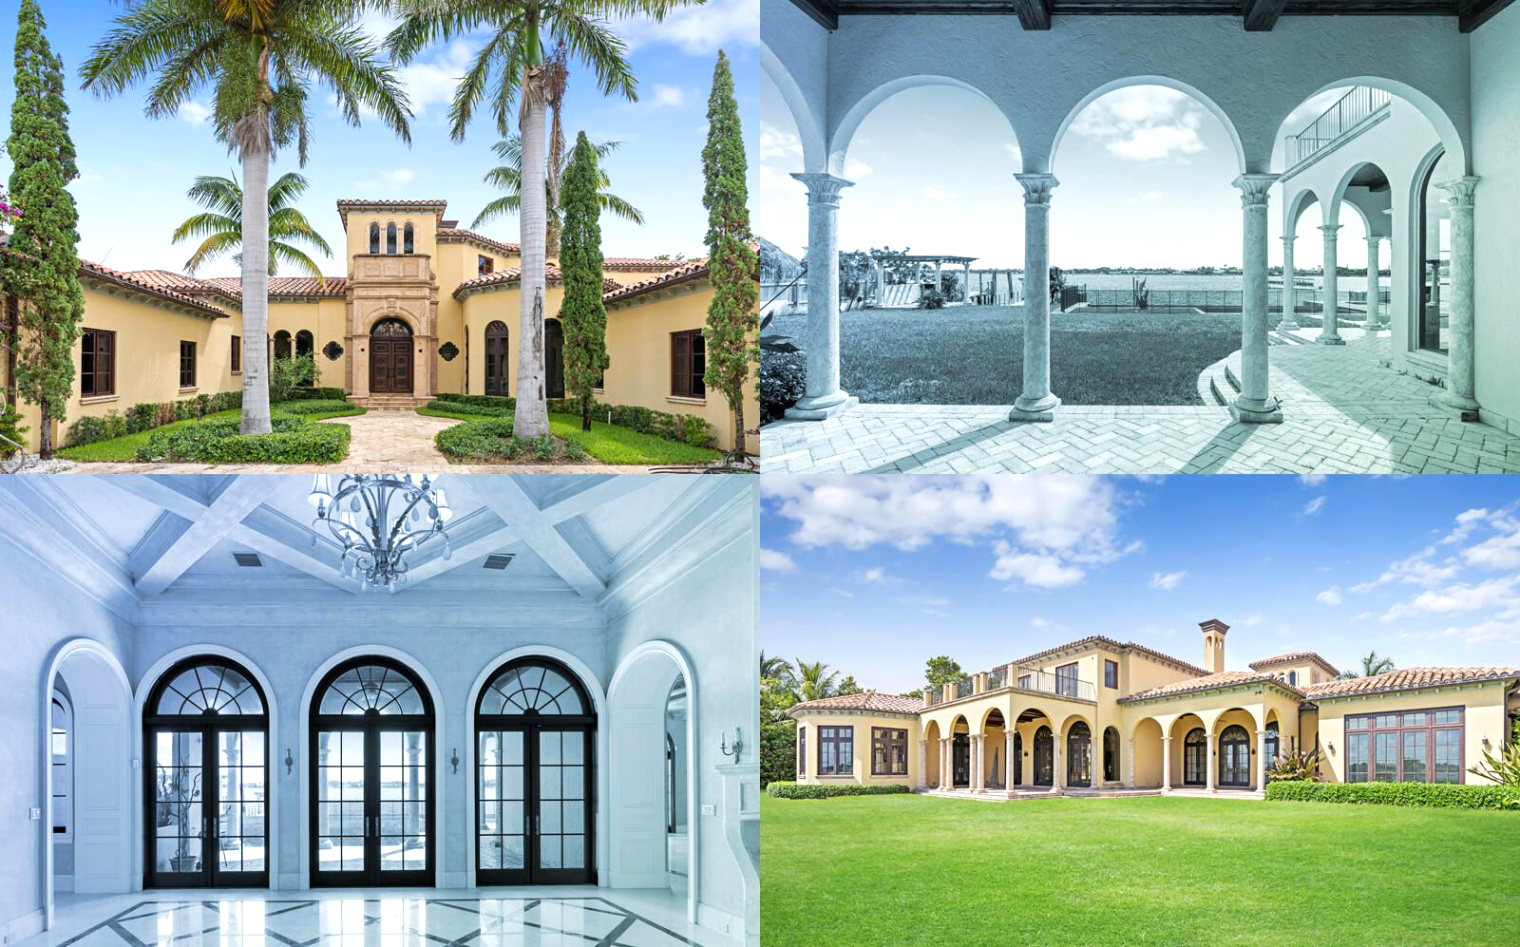 Car Insurance Companies In Bunnell, Flagler County Dans Auto Insurance Honcho S West Palm Beach Mansion for $10m